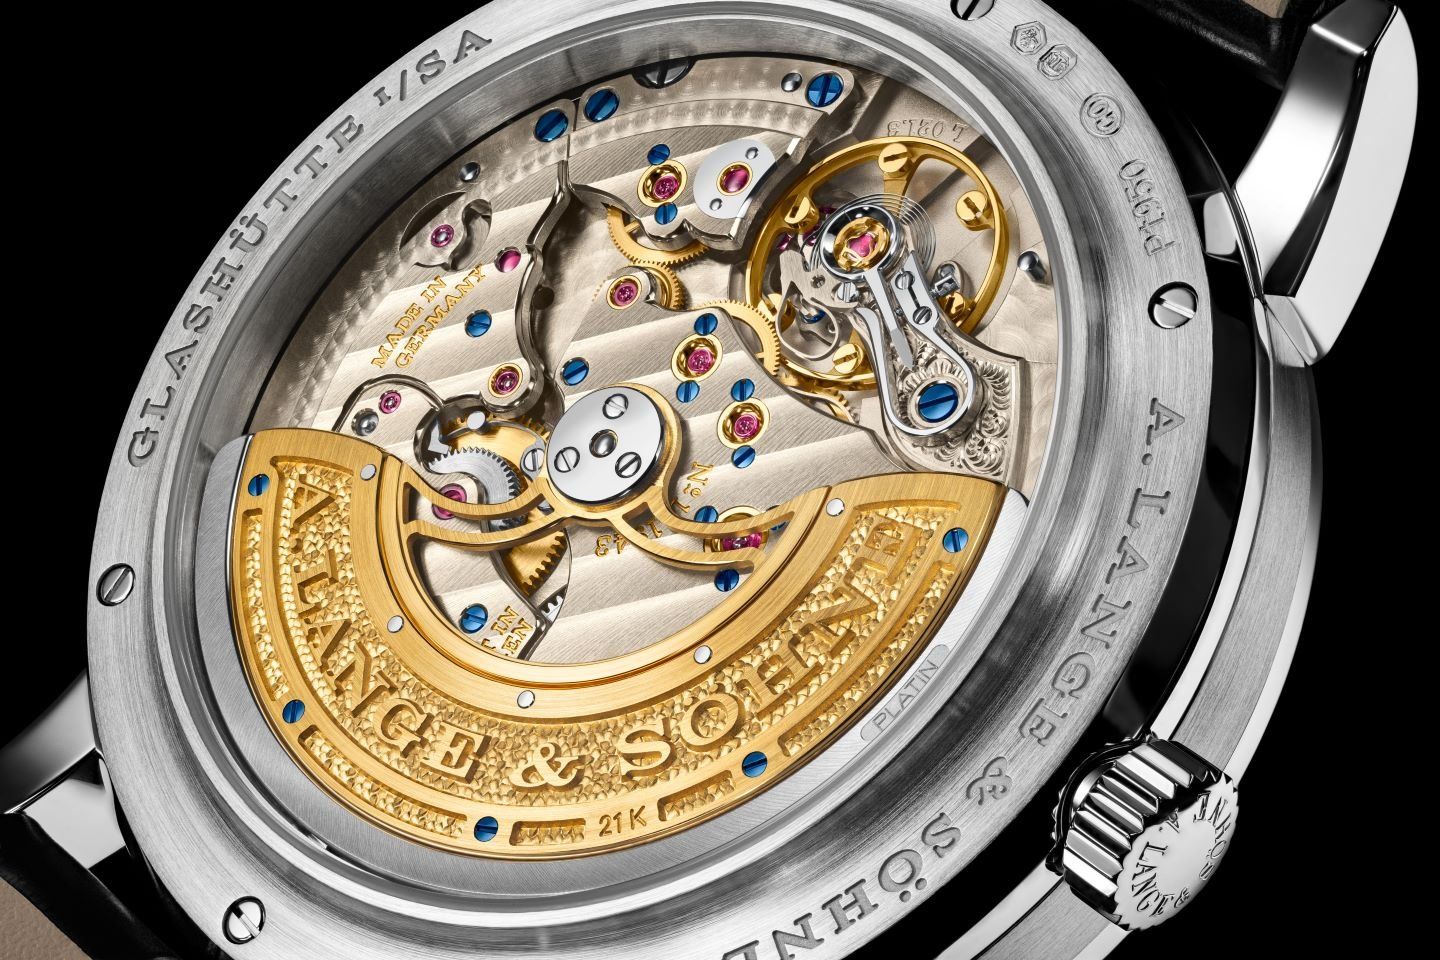 The hand-finished self-winding caliber L021.3 movement